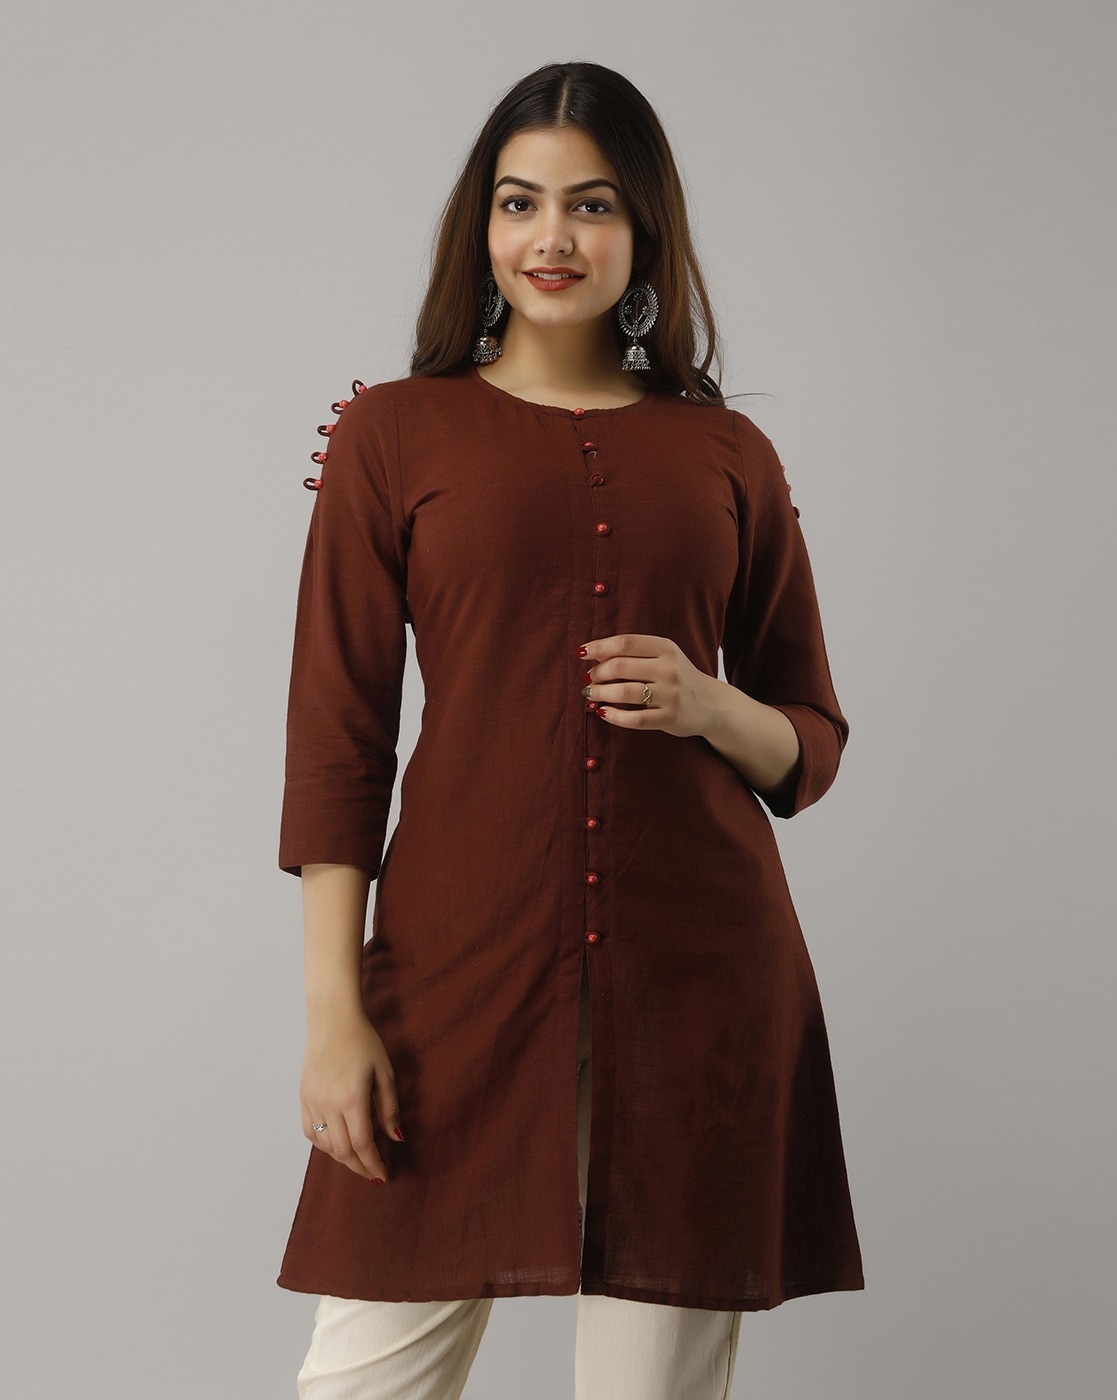 Washable Menhdi Green Printed Cotton Ladies Kurti Is Designed With A  Comfortable Fit Looking For A Perfect Ethnic at Best Price in Patna |  Sumeet Garments